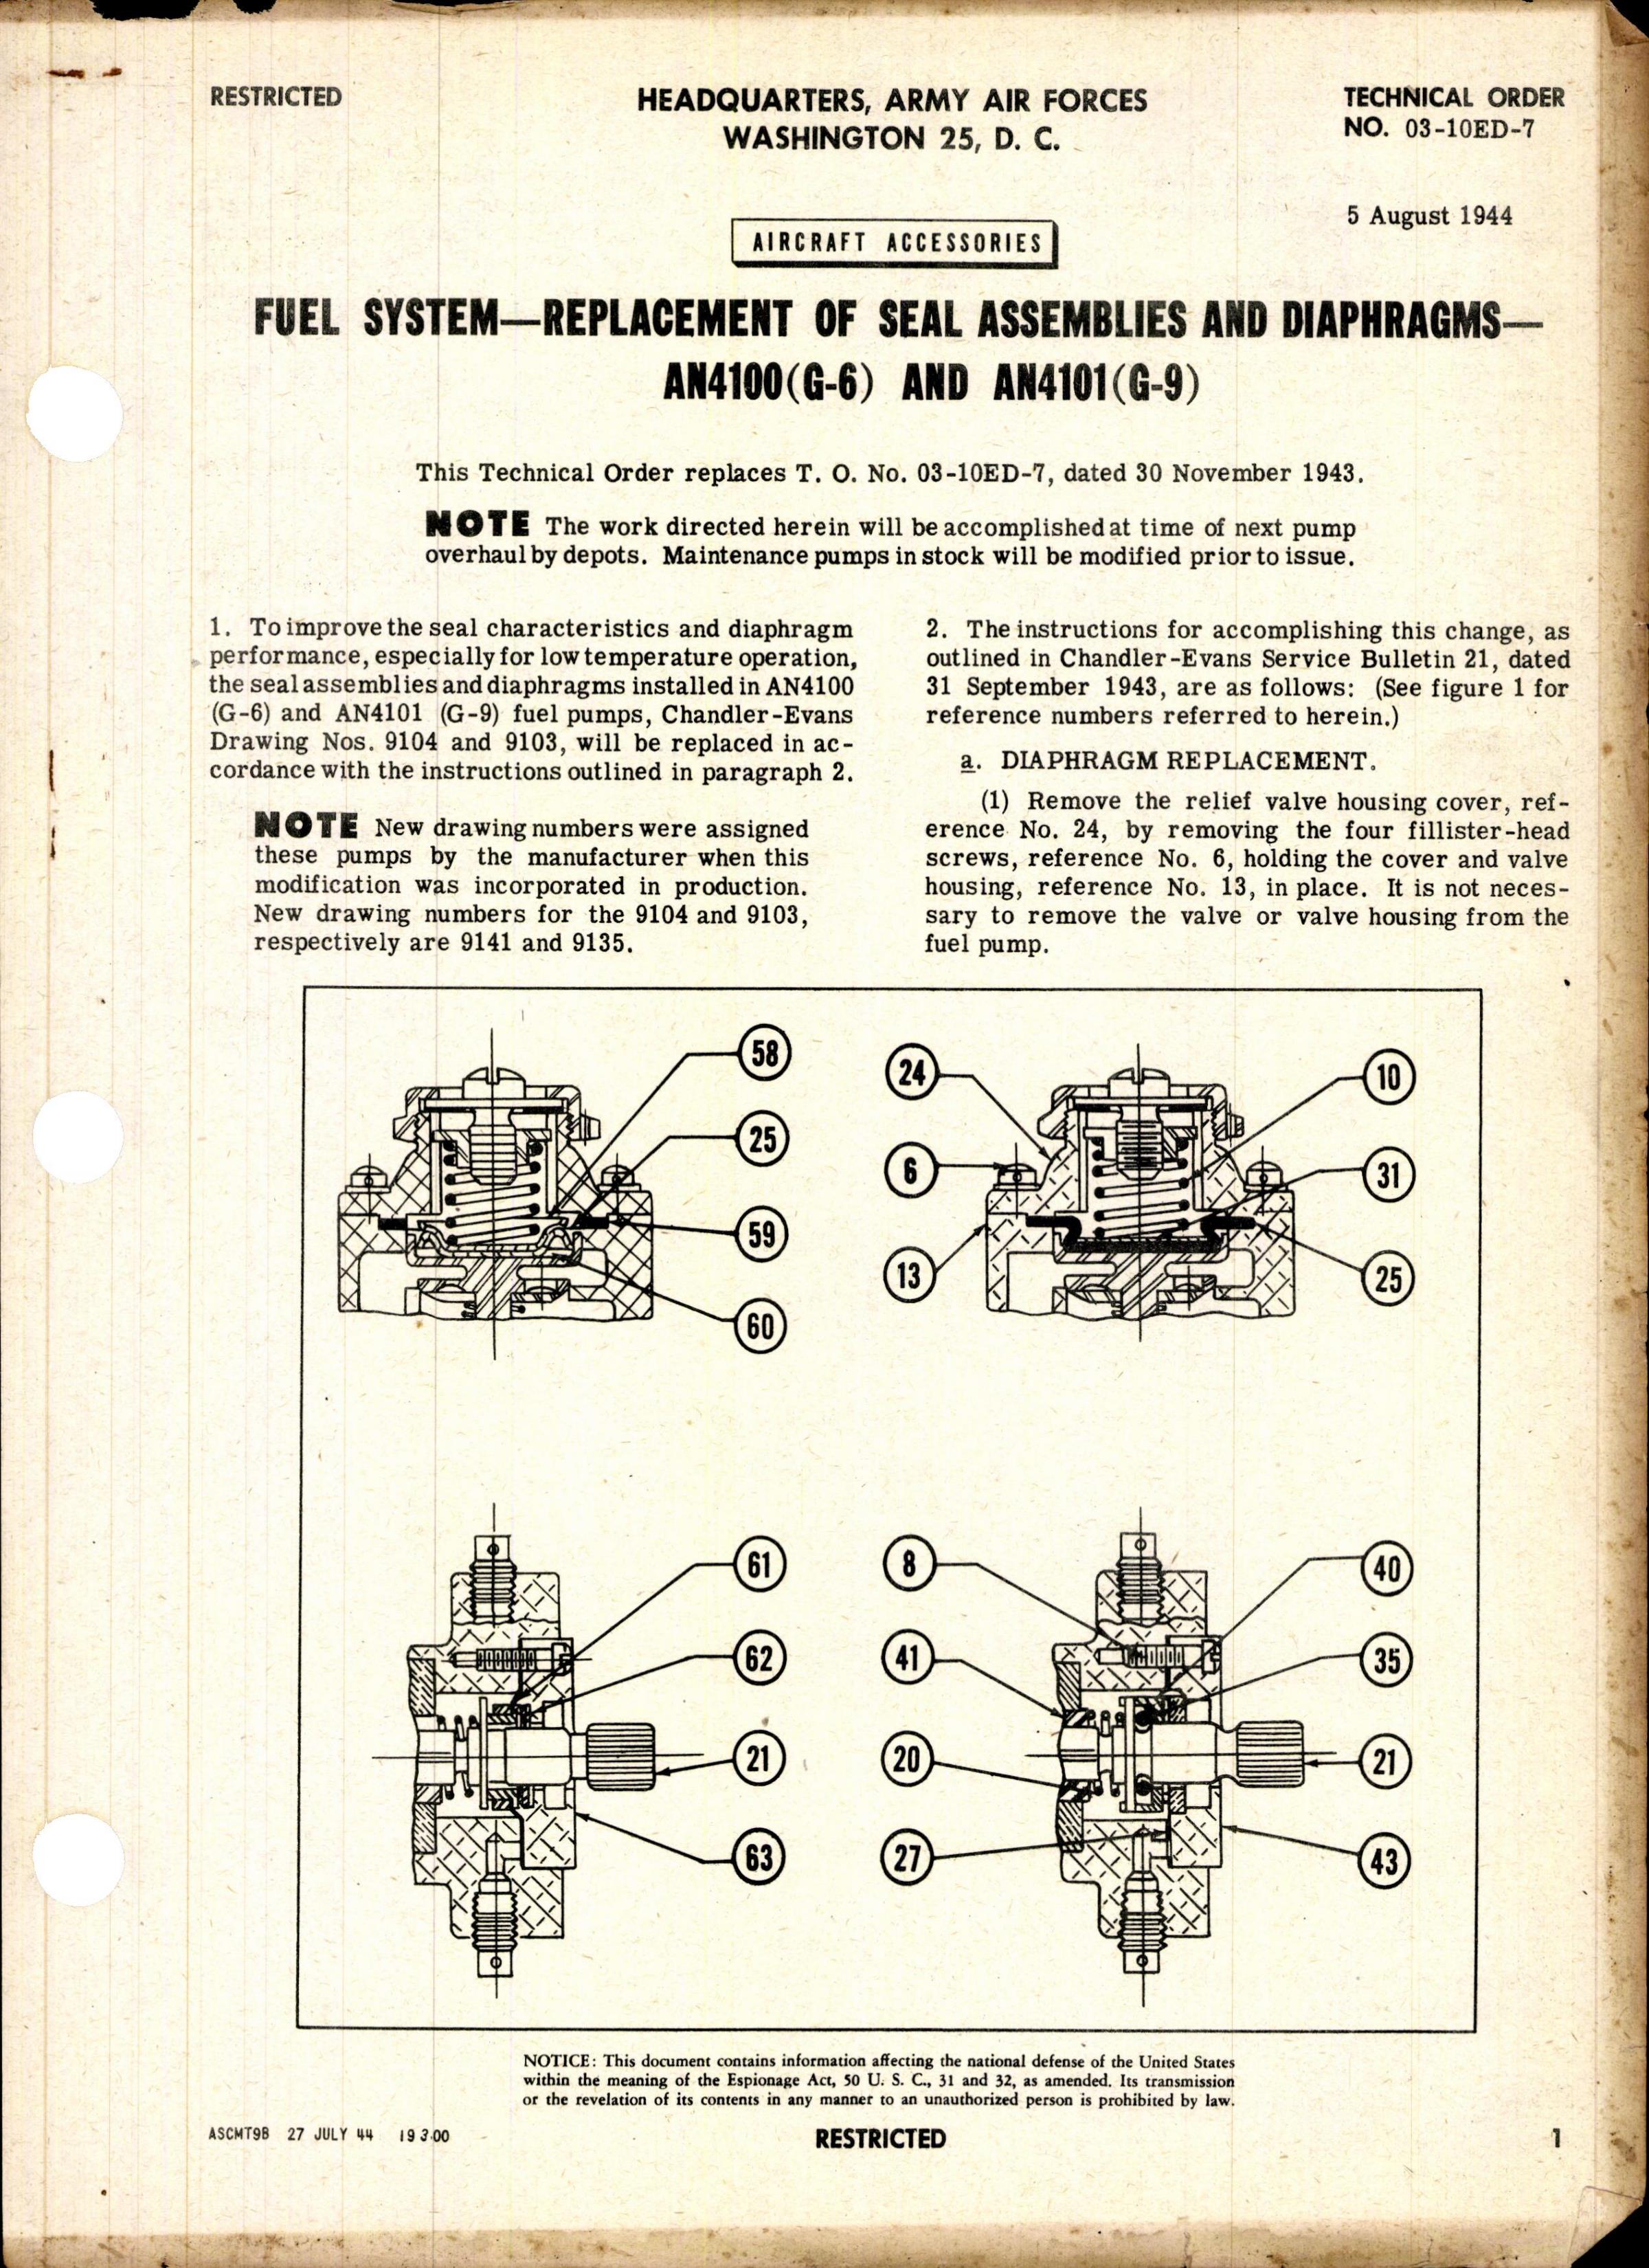 Sample page 1 from AirCorps Library document: Replacement of Seal Assemblies and Diaphragms - AN4100 (G-6) and AN4101 (G-9)